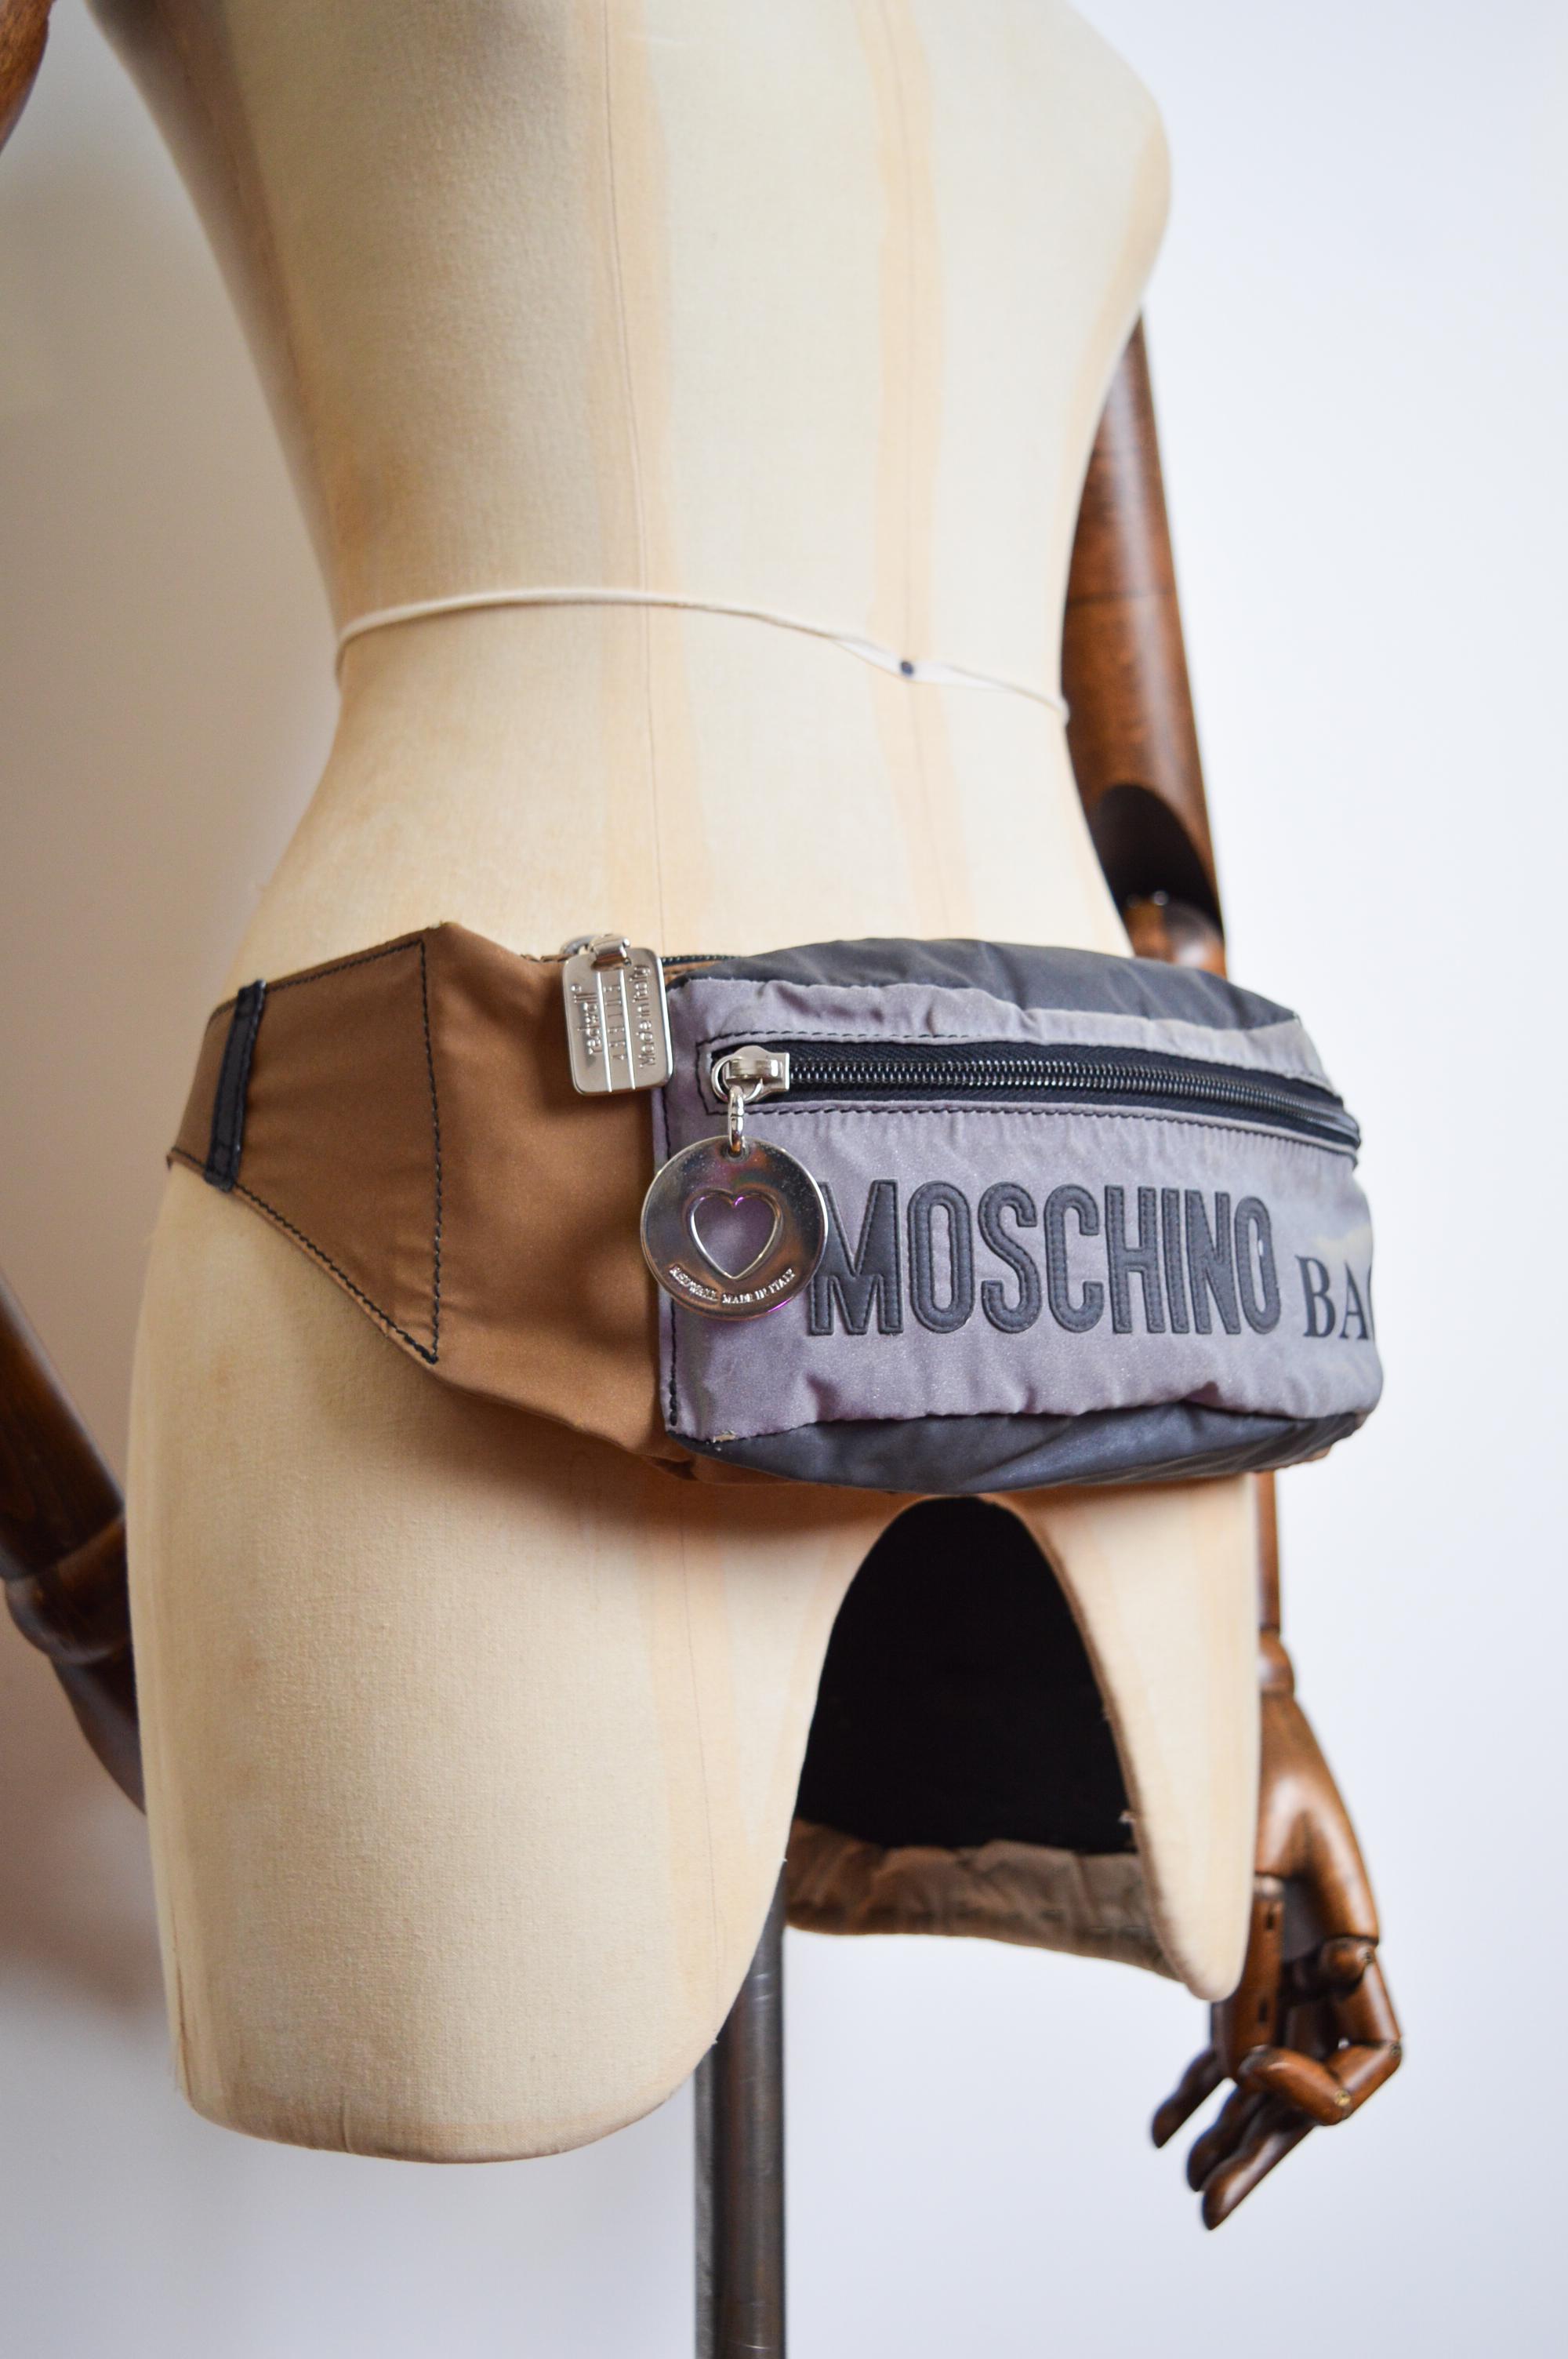 Early 1990's Vintage MOSCHINO Reflective Gold & Silver Bum Bag - Fanny Pack For Sale 4